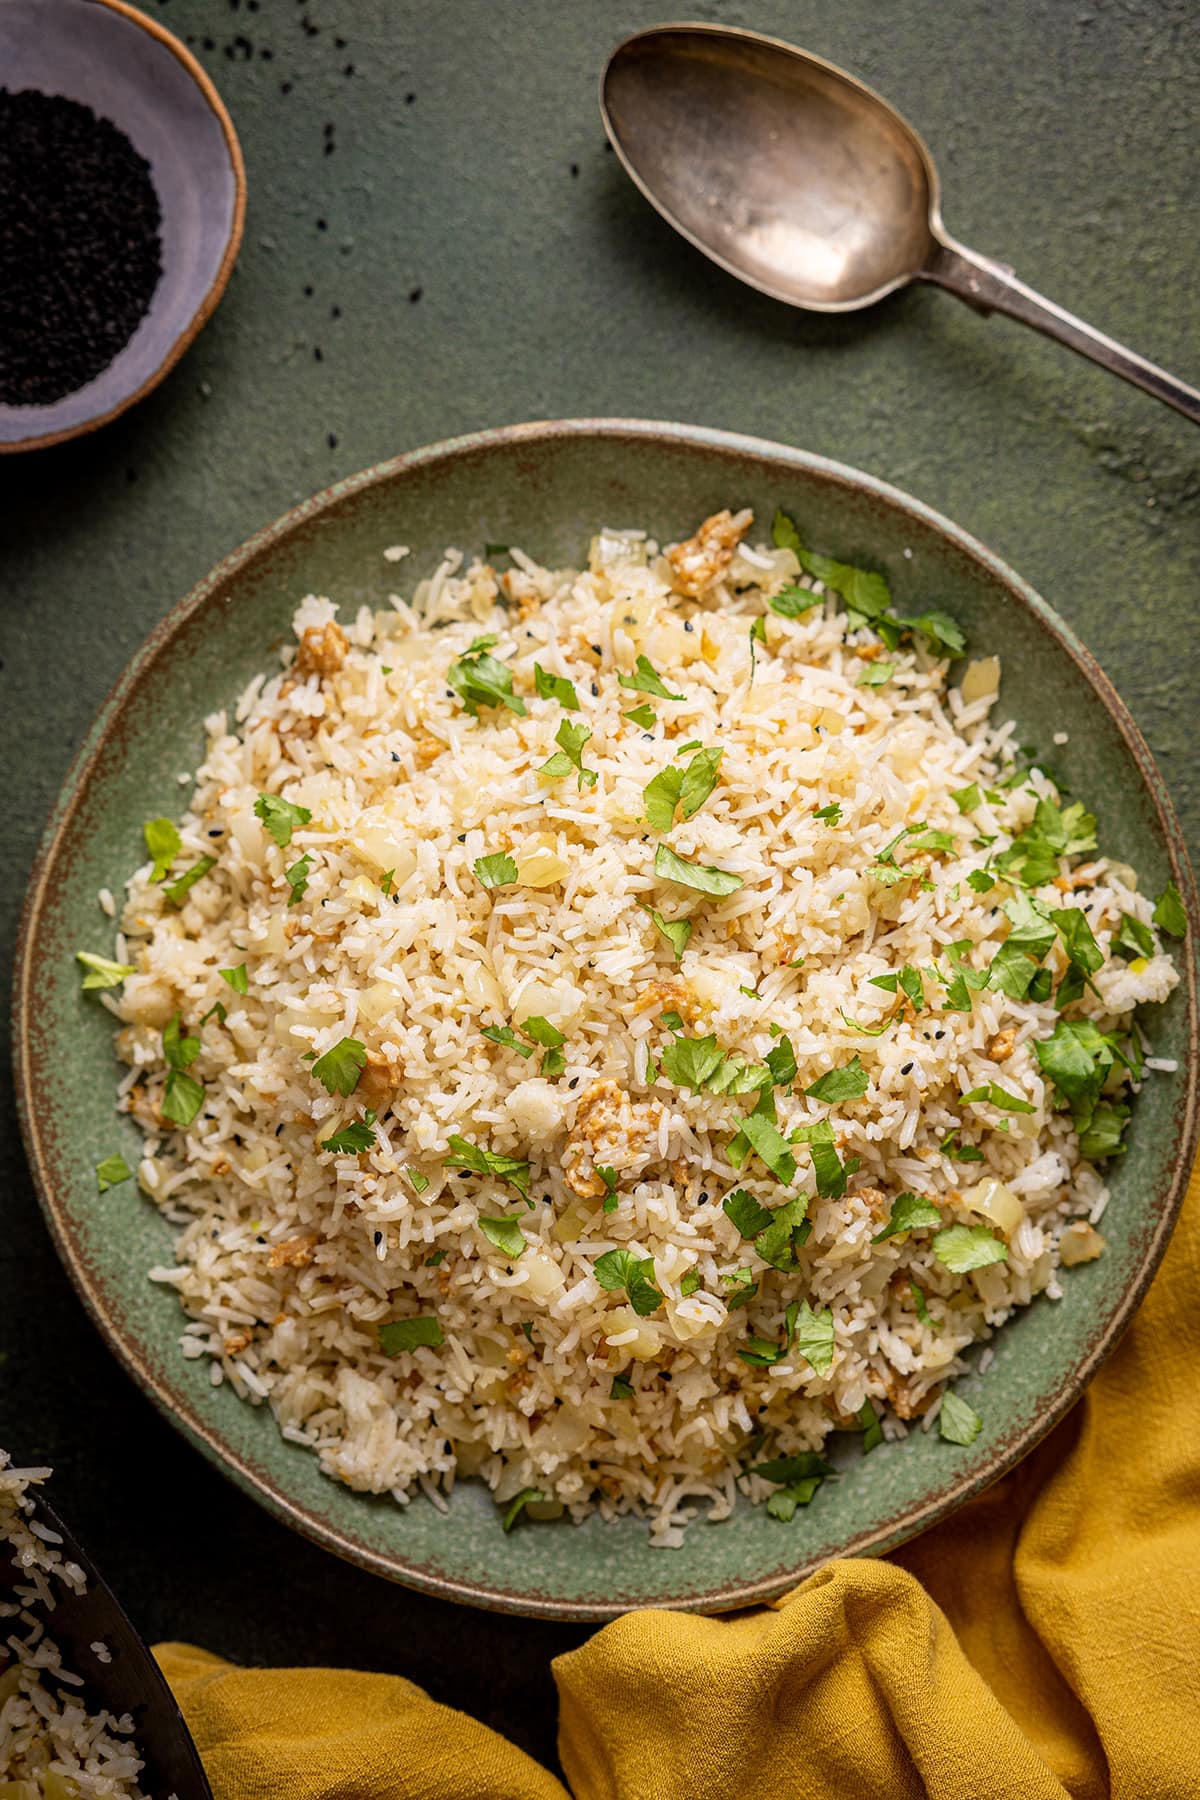 Onion fried rice on a green plate sprinkled with coriander and a mustard napkin in the bottom corner.